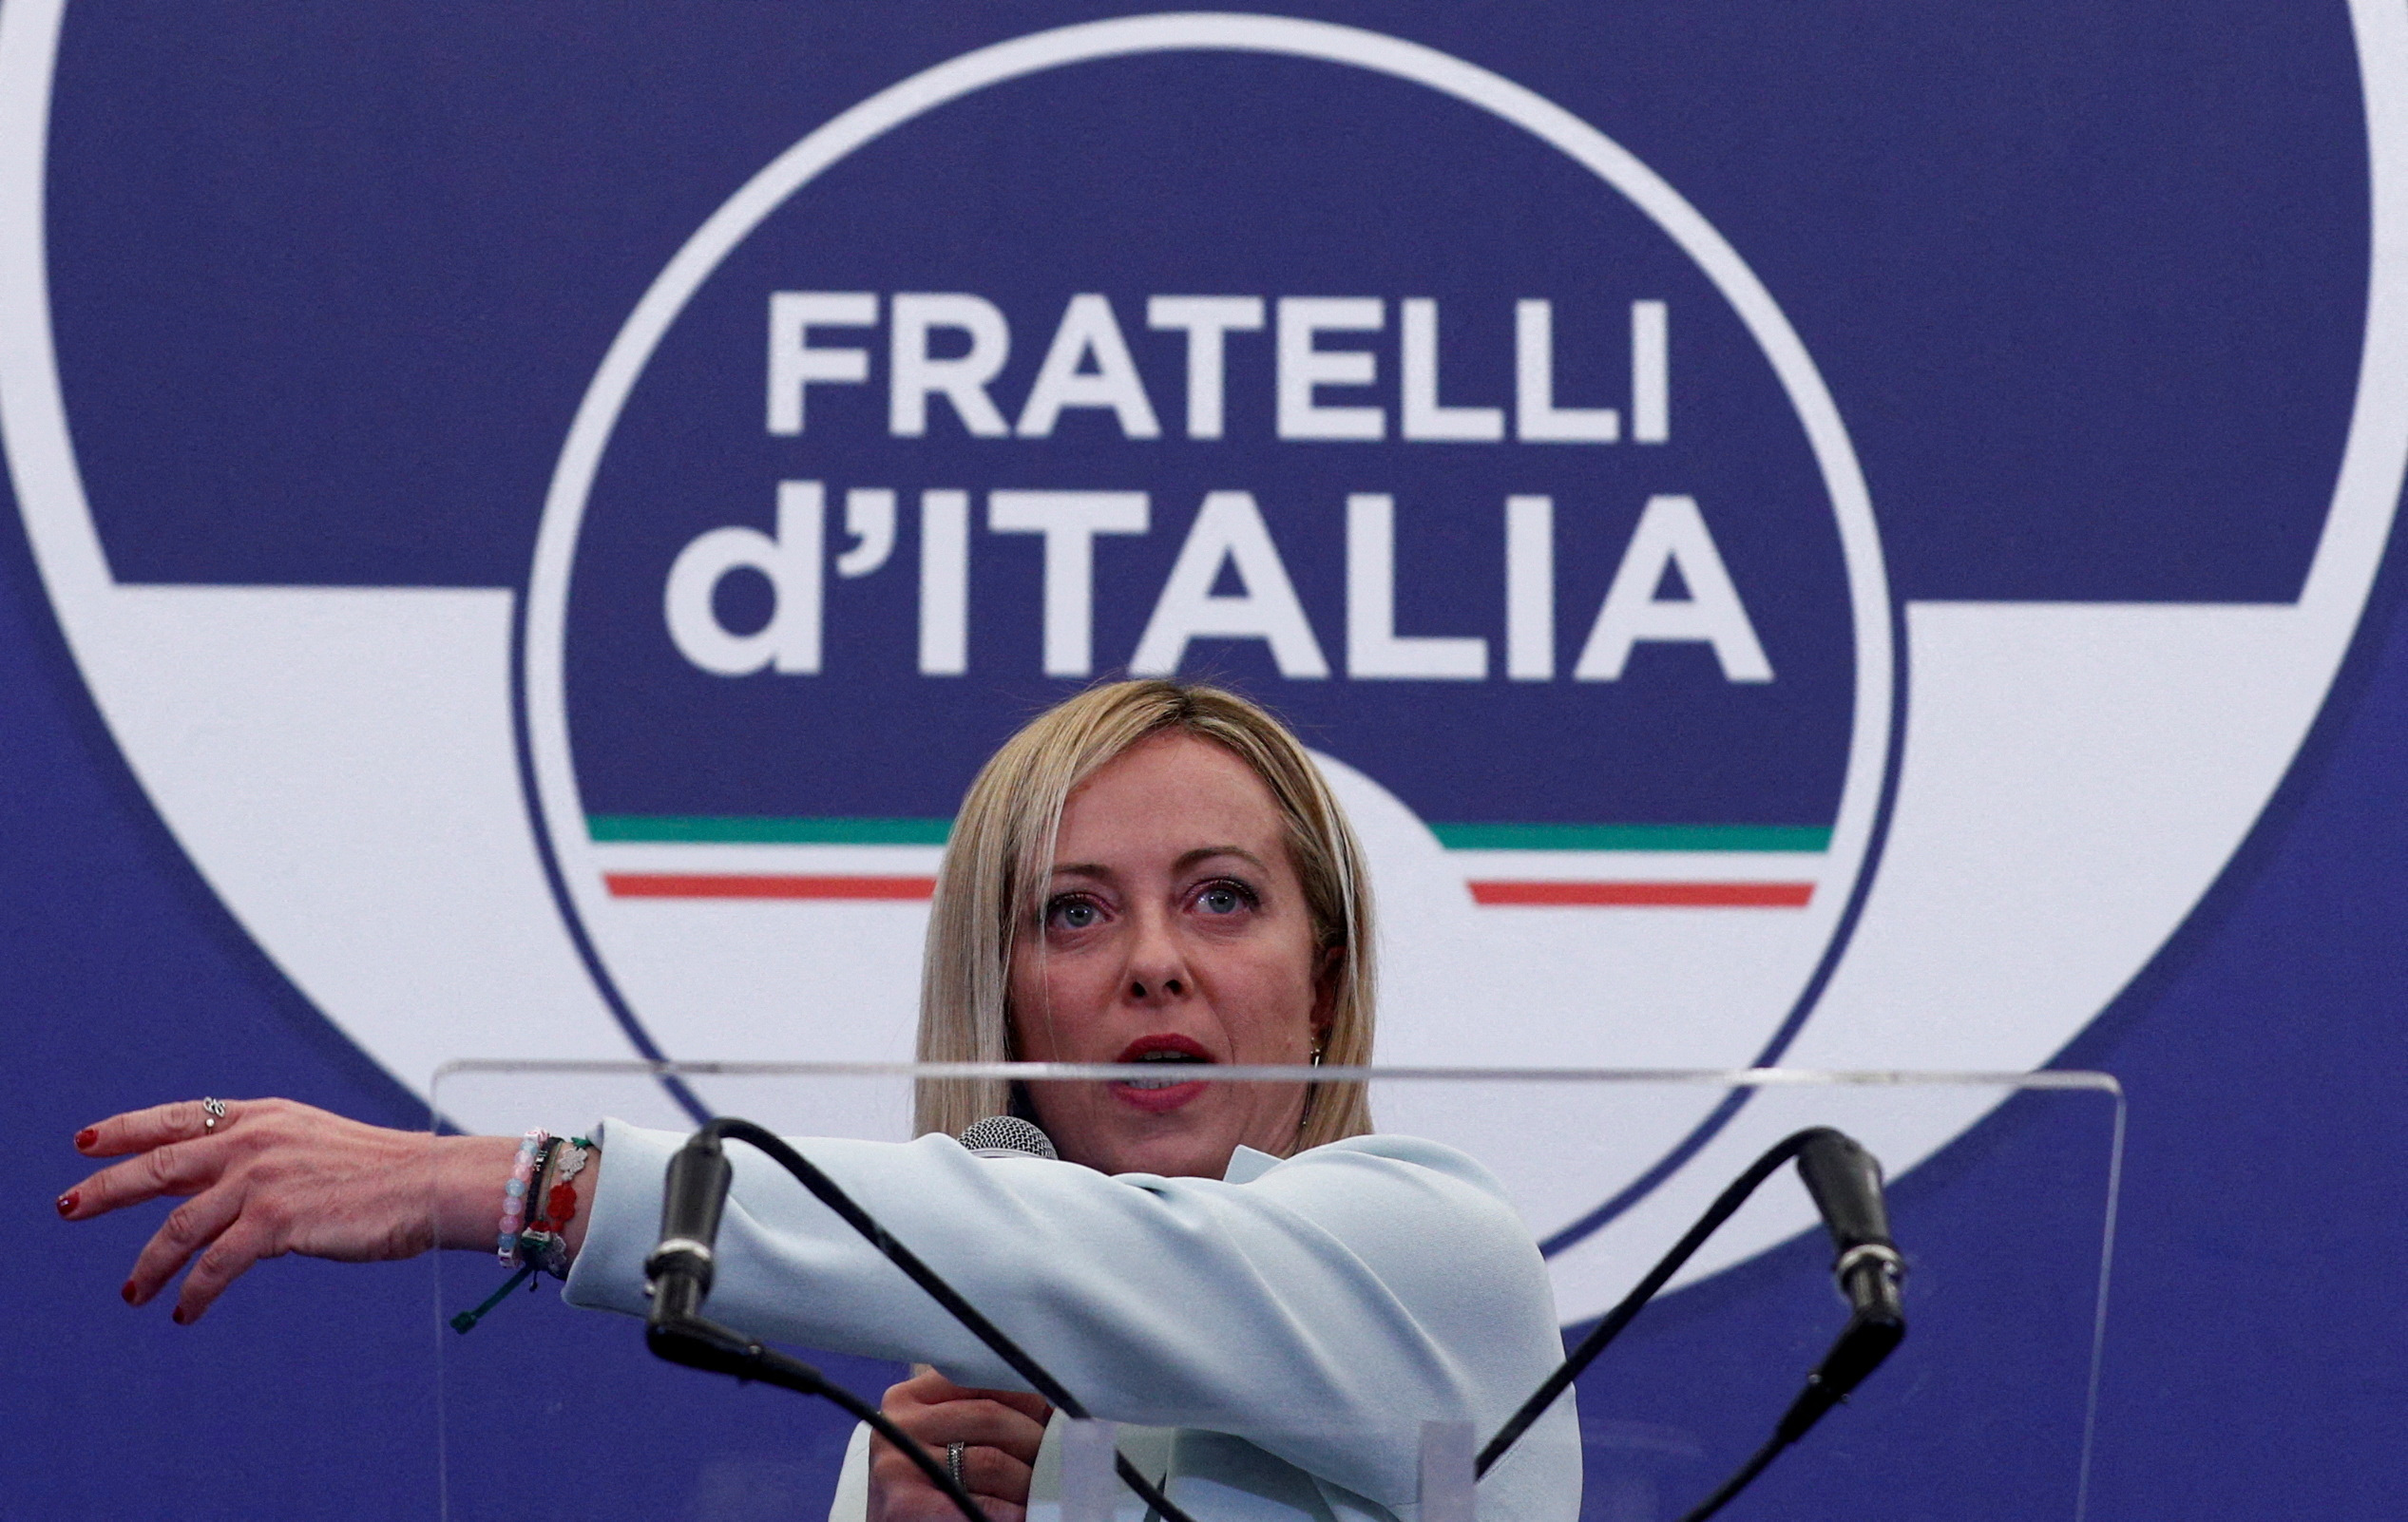 Snap election in Italy